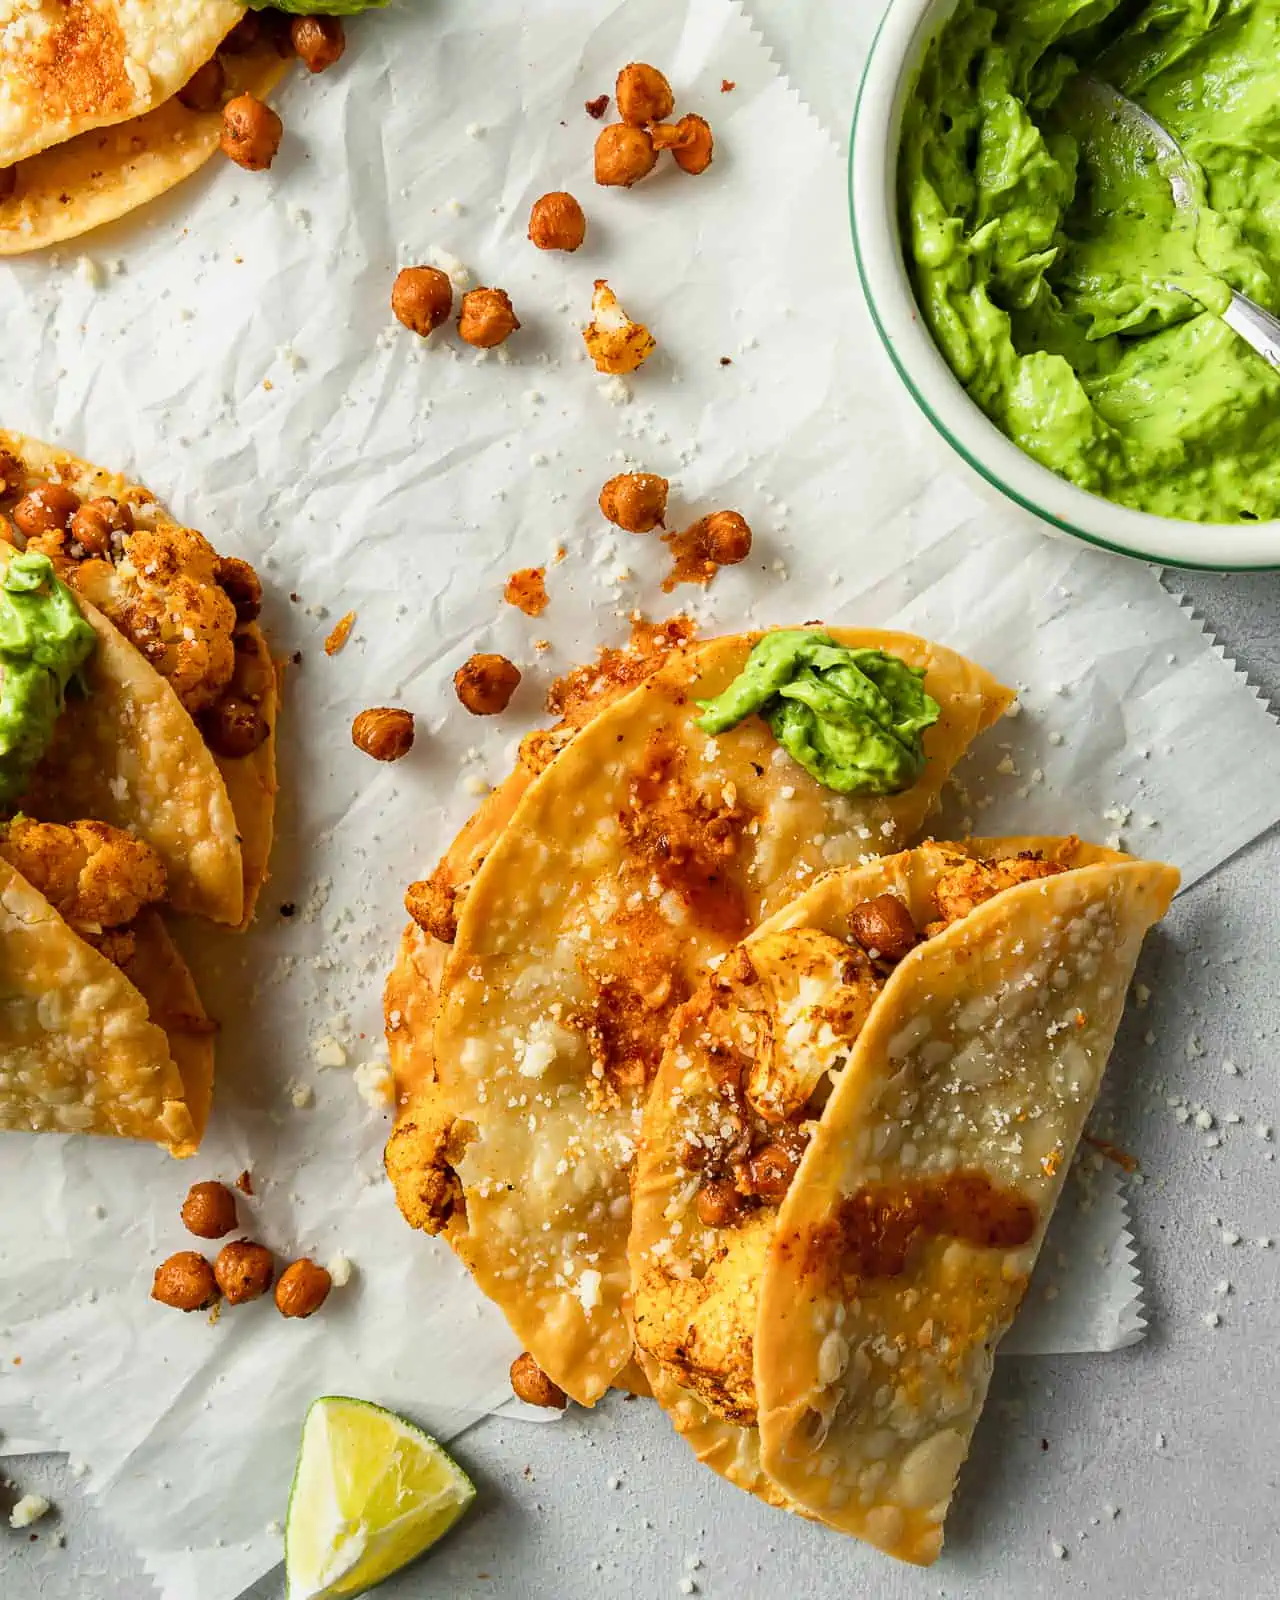 Cauliflower and Chickpea Tacos with avocado and hot sauce